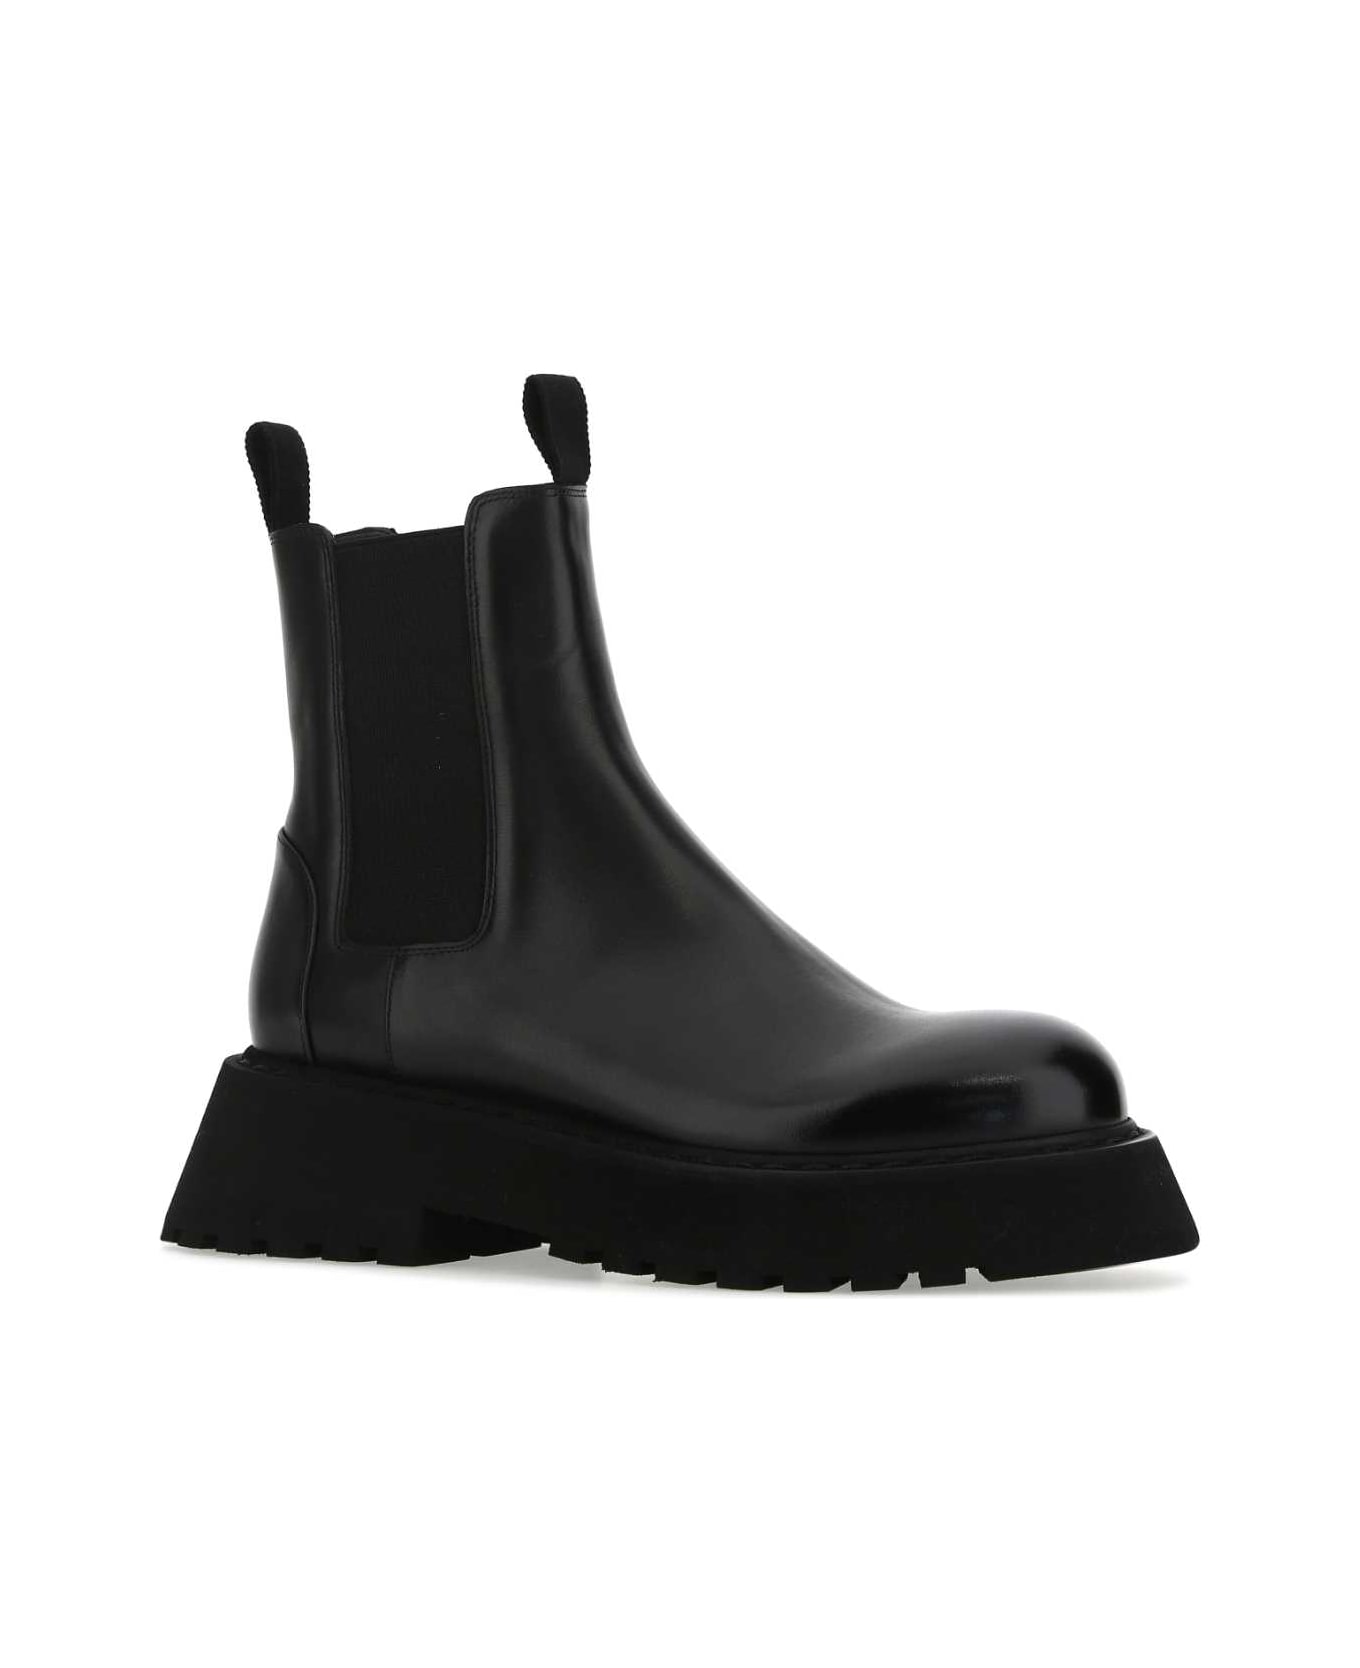 Marsell Black Leather Ankle Boots - BLACK ブーツ